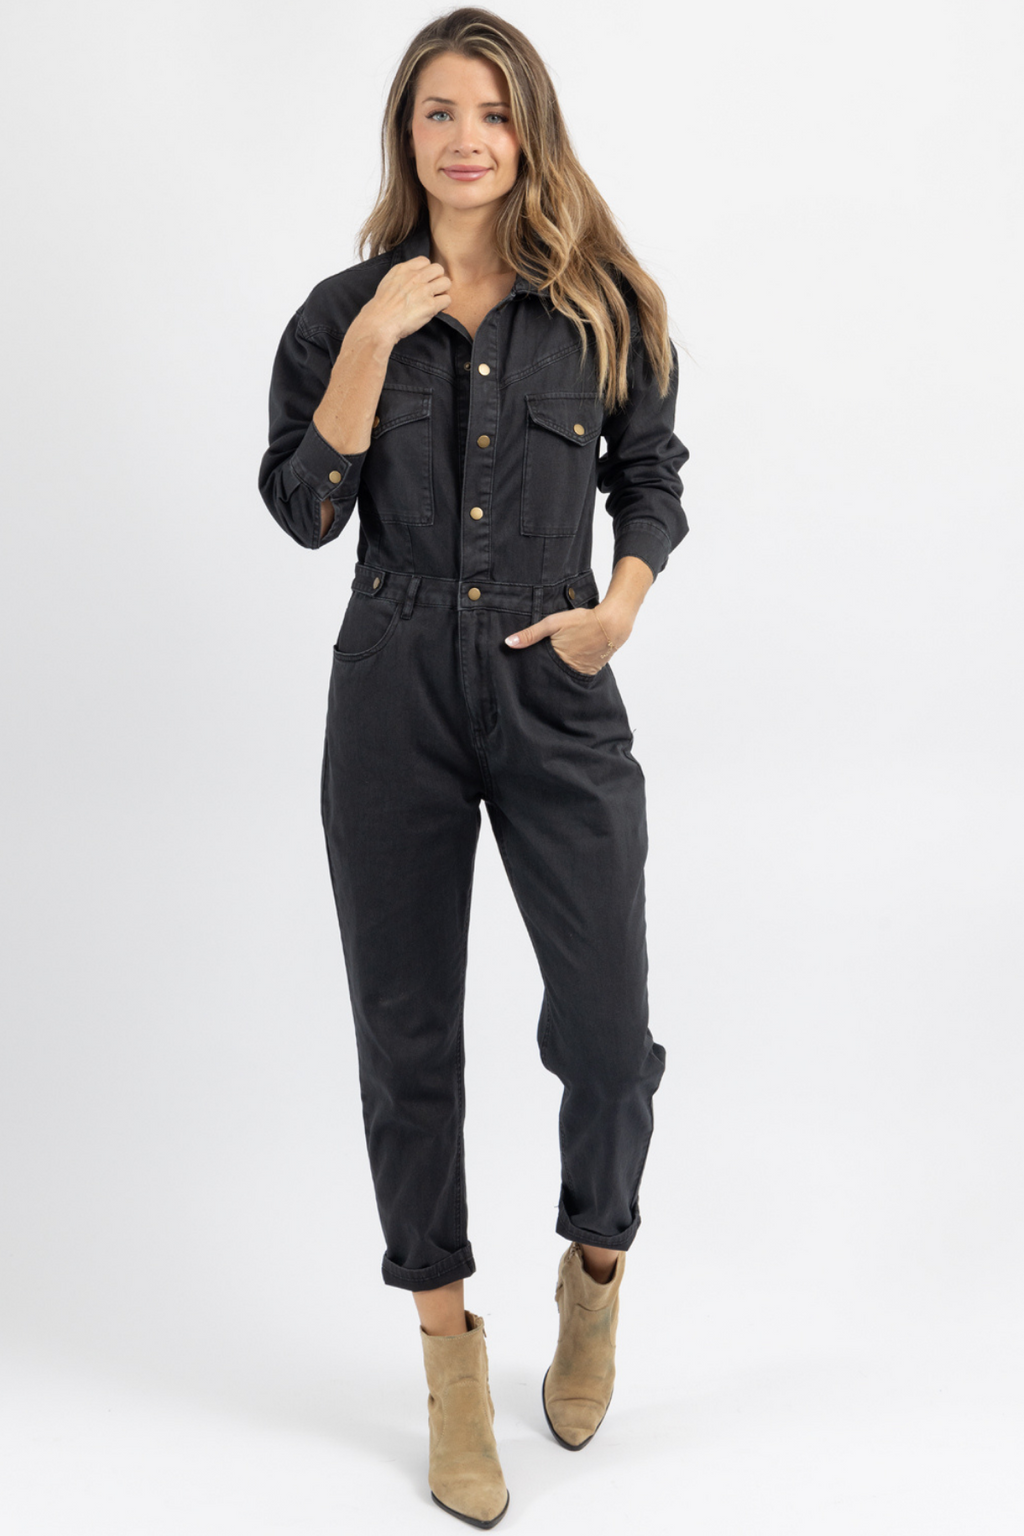 SPELLBOUND WASHED BLACK UTILITY JUMPSUIT *BACK IN STOCK*